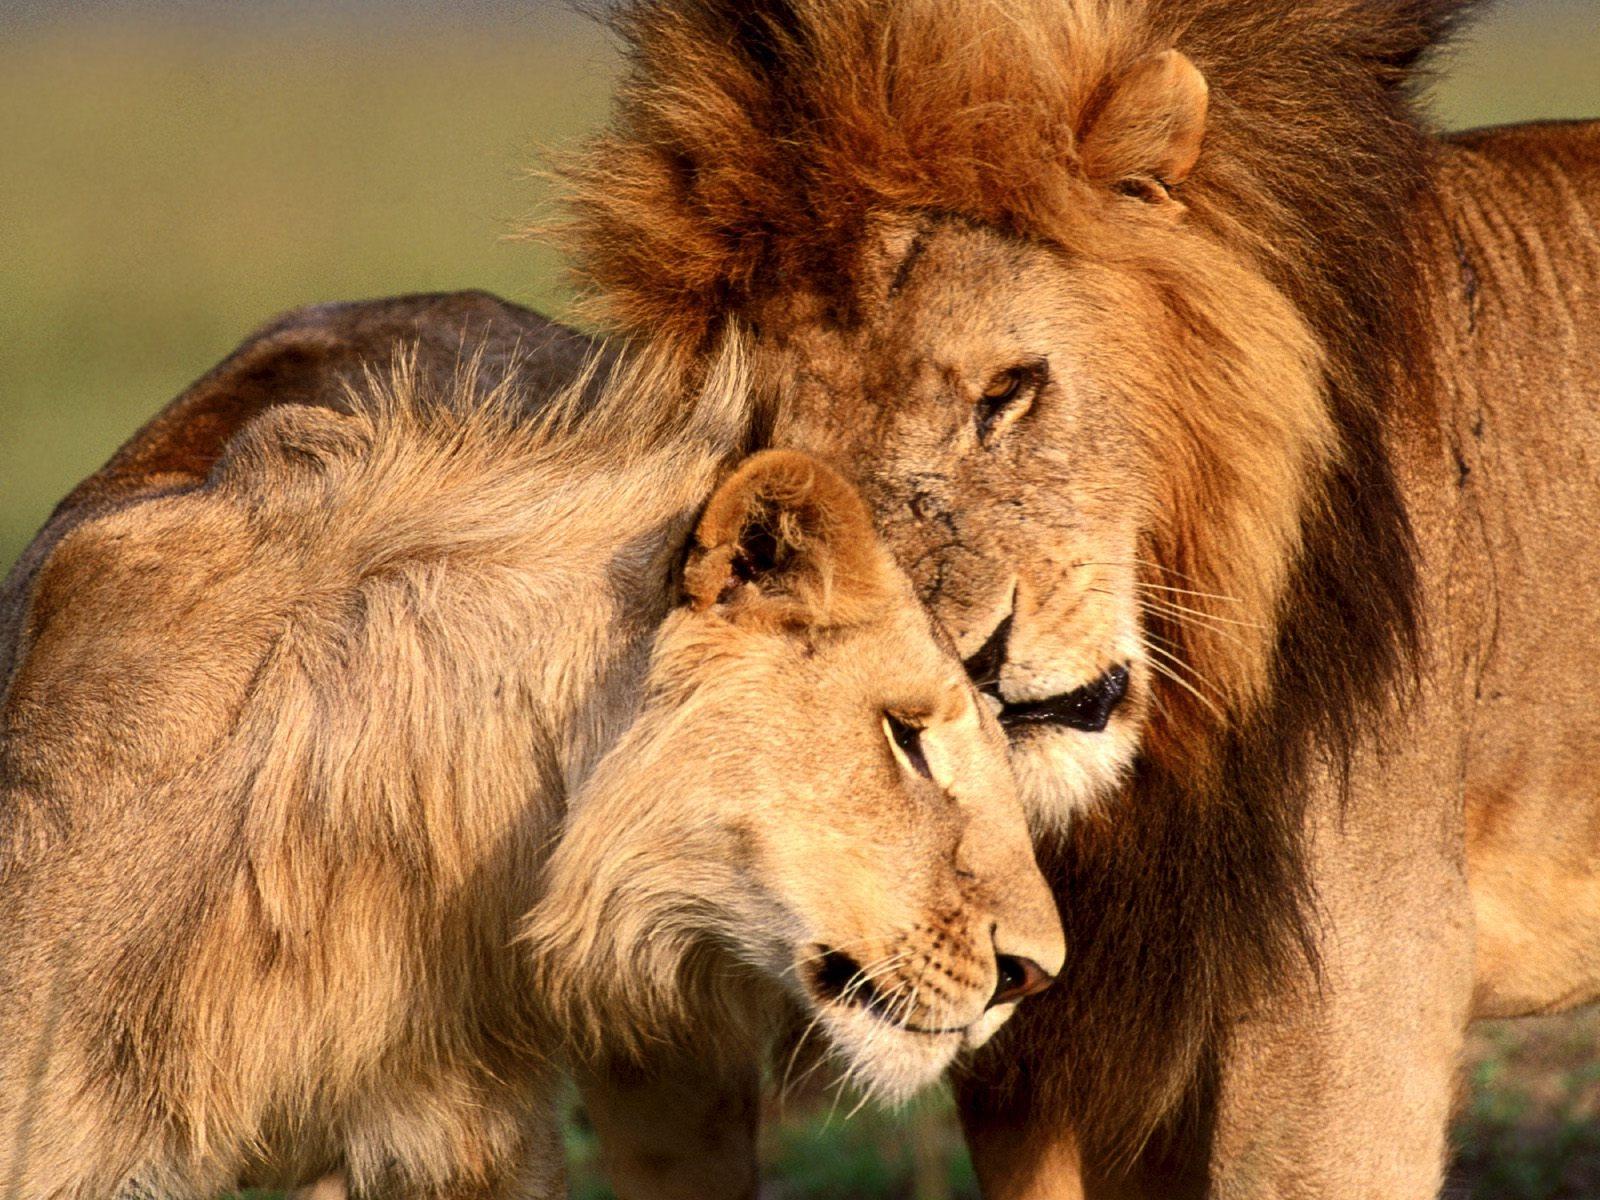 Hd Pic Of Lion And Lioness.